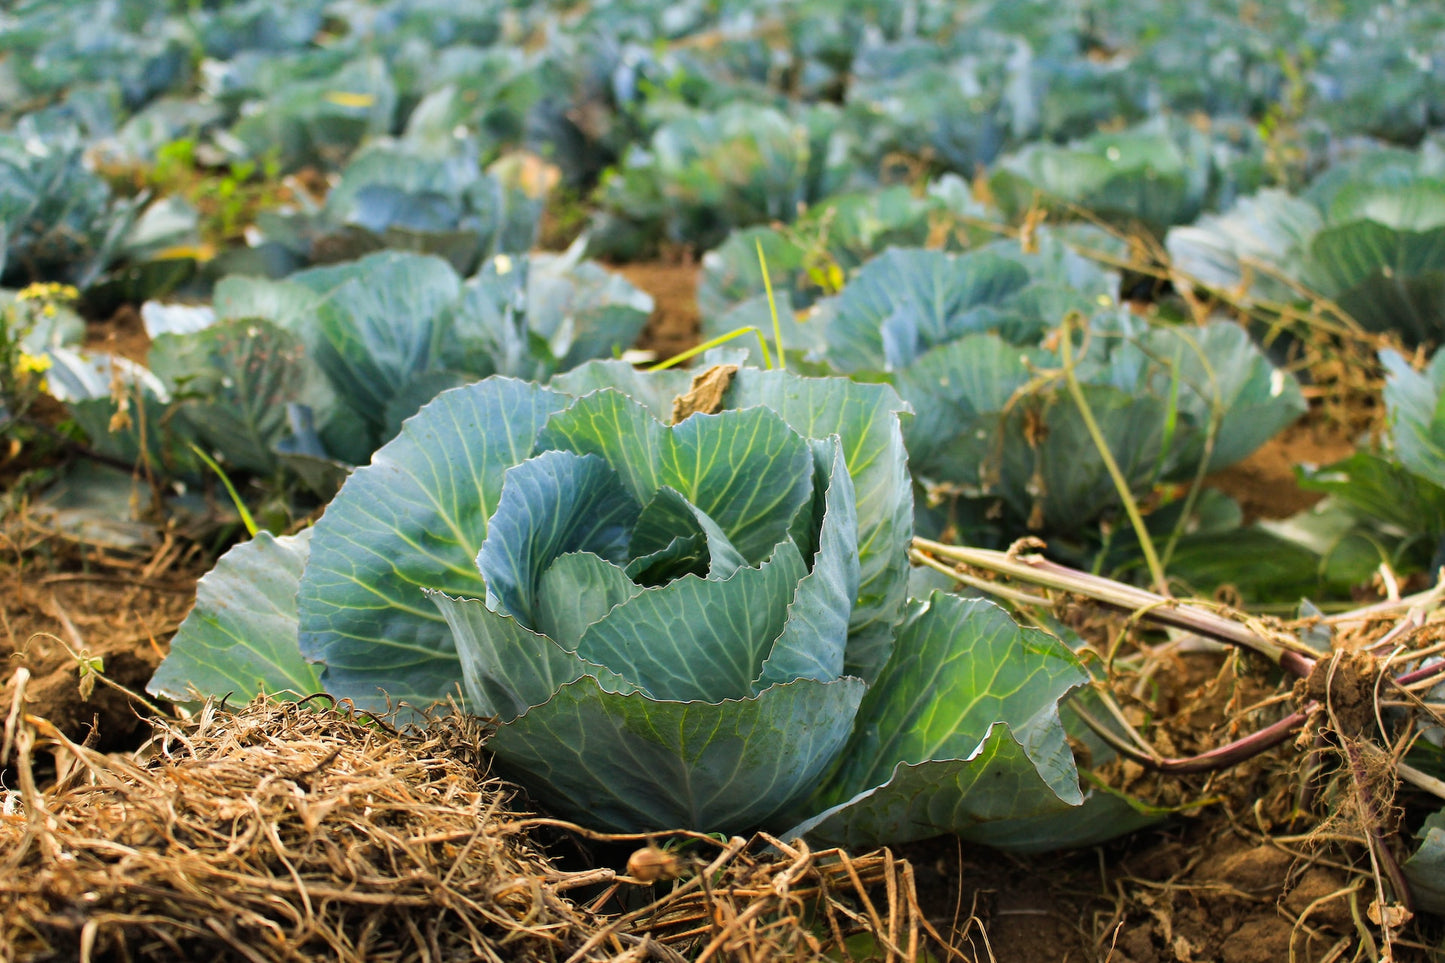 On display are many heads of cabbage, of the variety Brunswick, still in the field awaiting harvest. We are low to the ground, with a single head of cabbage in focus.  The remaining heads of cabbage in the field move out of focus. We can see 8 rows of cabbage heads in the background, getting smaller and more out of focus as the distance increases.